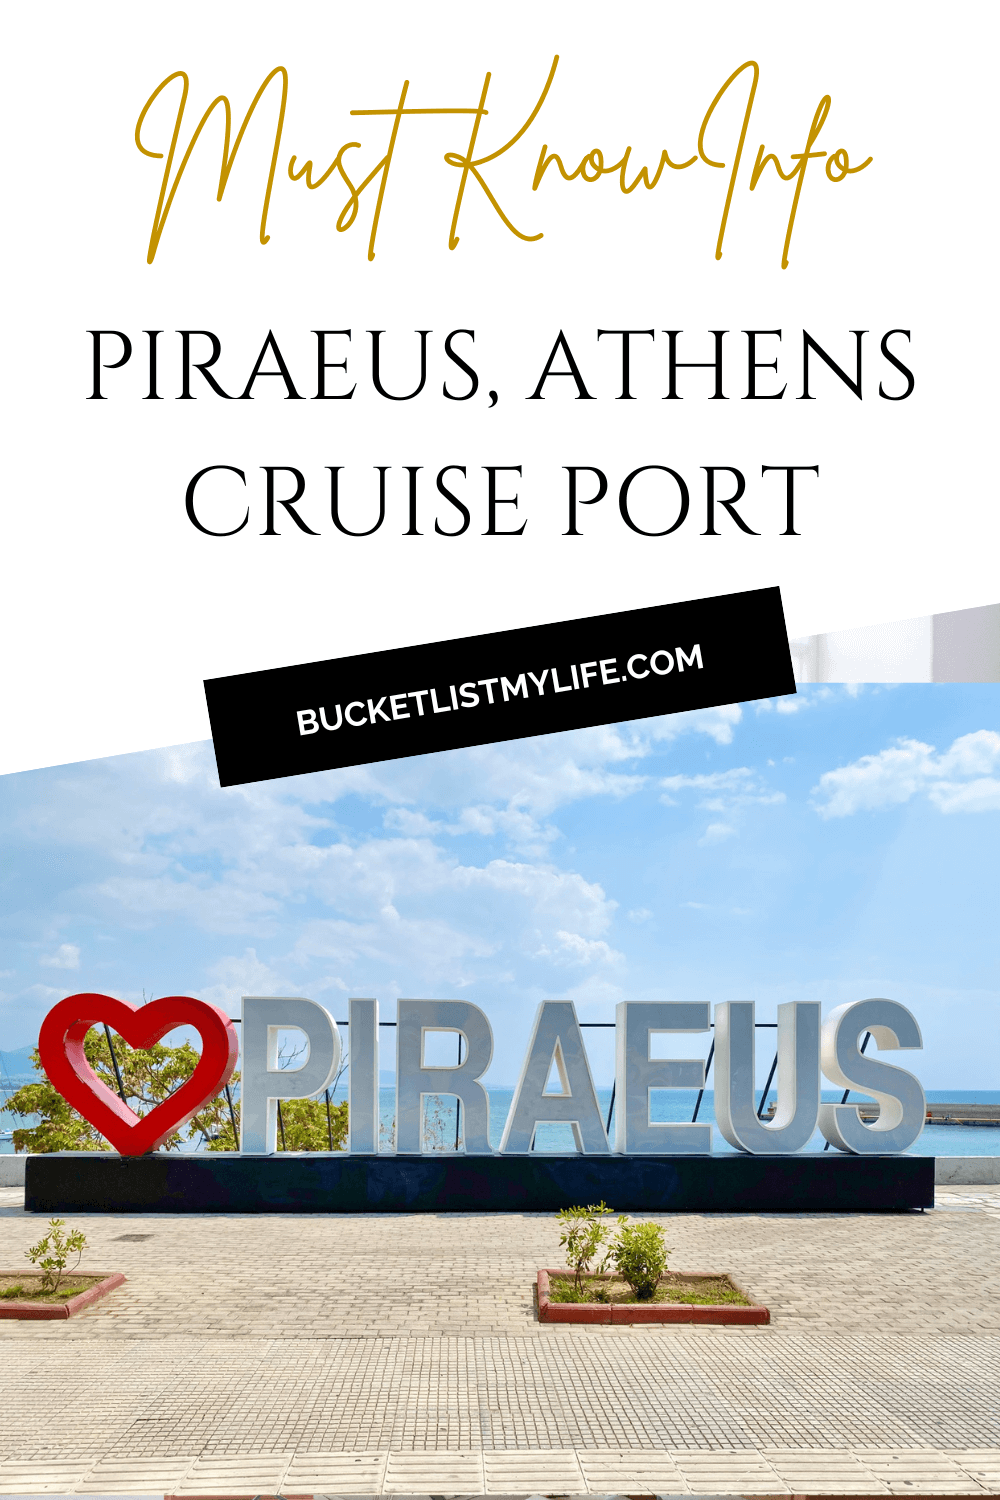 Welcome To Piraeus, Athens Cruise Port - What You Need To Know